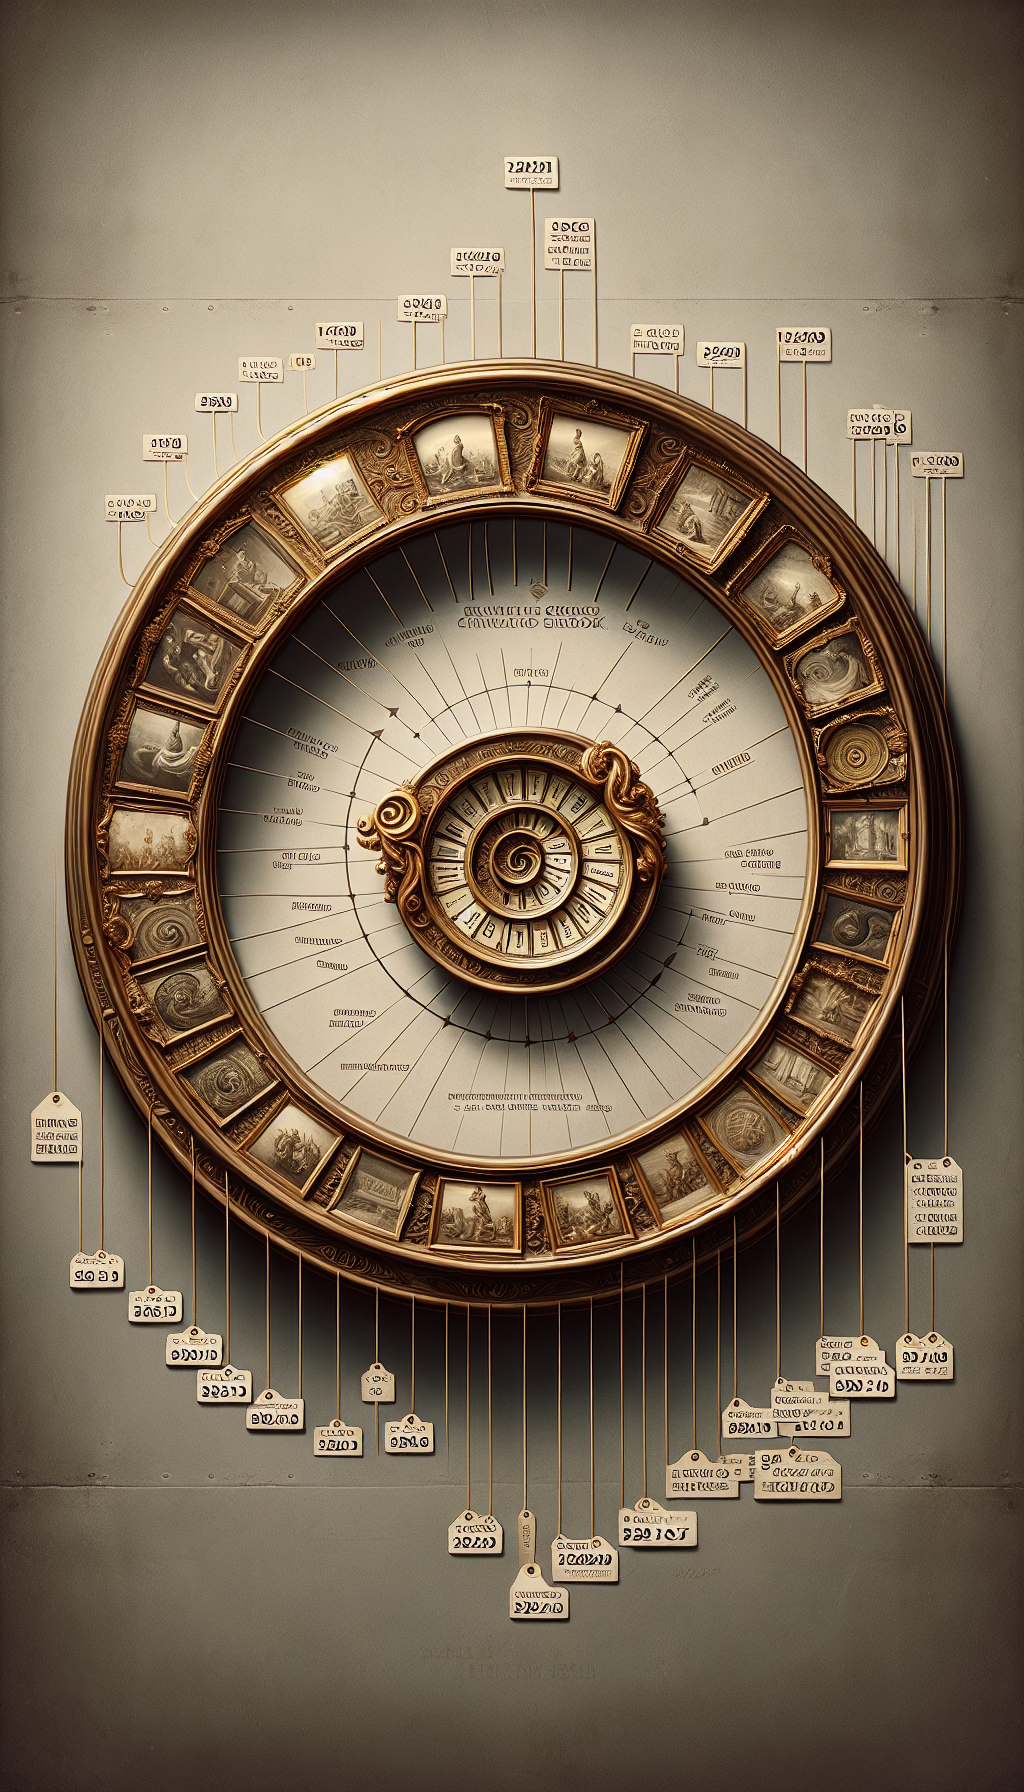 An ornate antique mantel clock sits at the center of a spiral timeline, with each twist displaying different historical art styles and significant time periods. Price tags hang from each era, subtly transitioning into a classy price guidebook that overlays the bottom corner, symbolizing the merging of time's rarity and the clock's value.